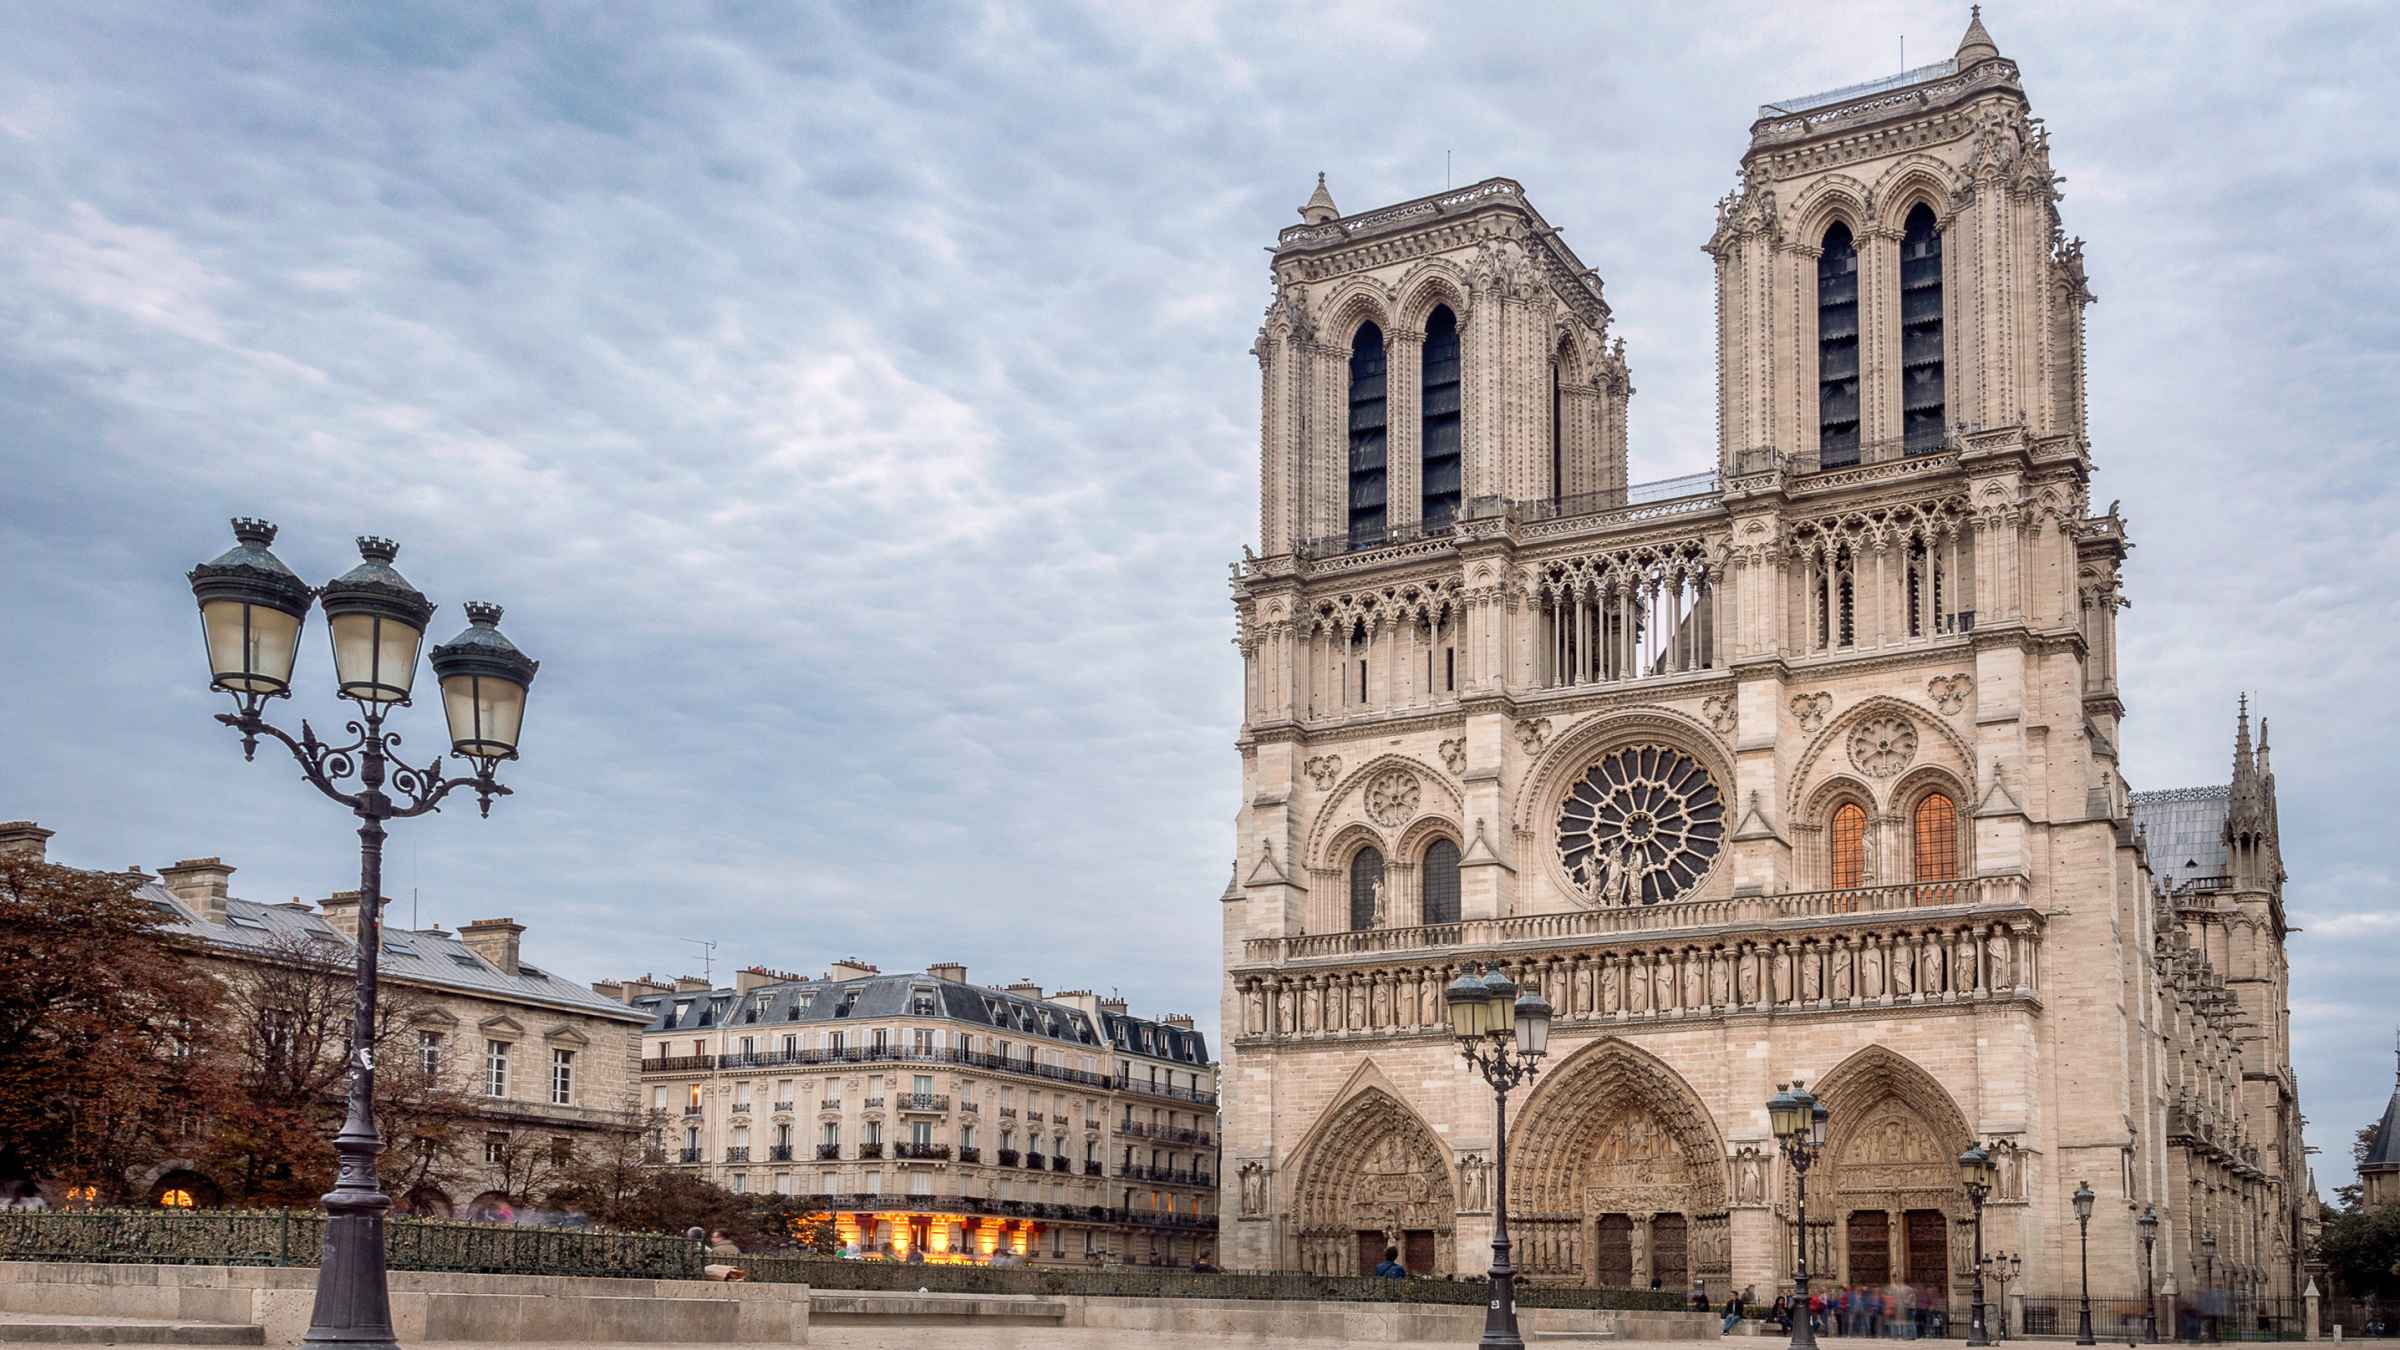 notre dame cathedral cost to visit